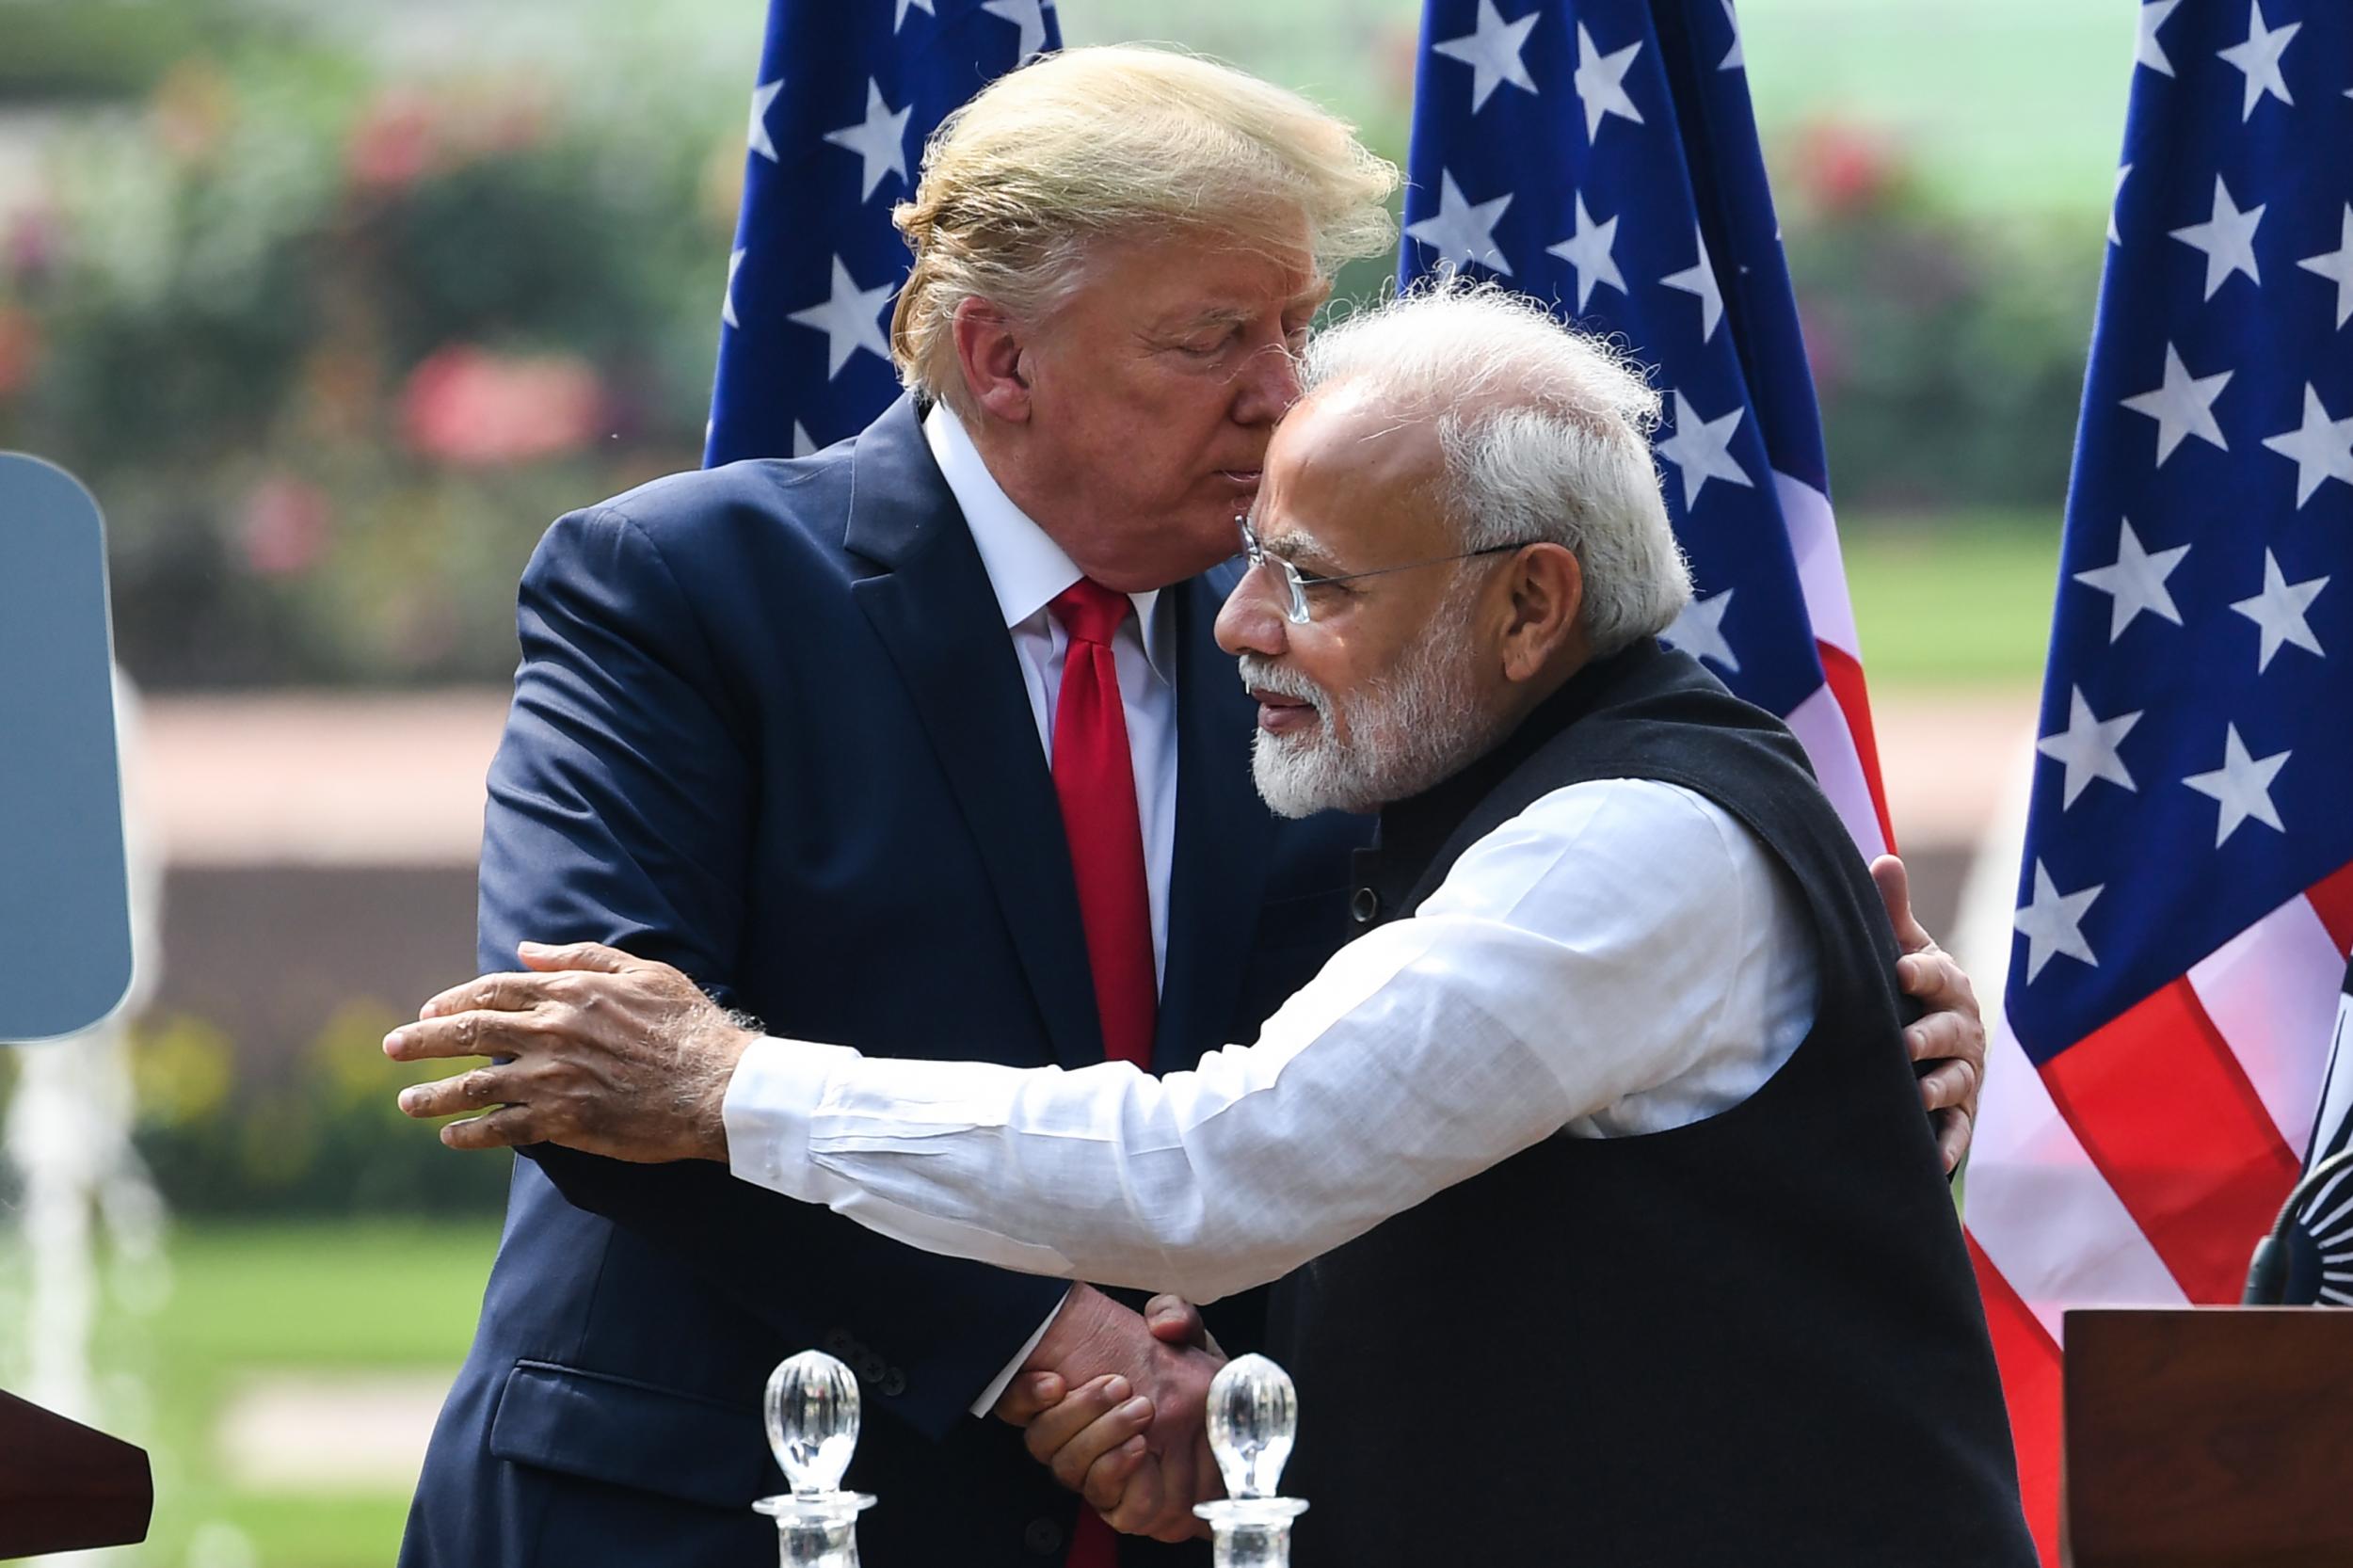 Trump and Modi have frequently heaped praise on one another